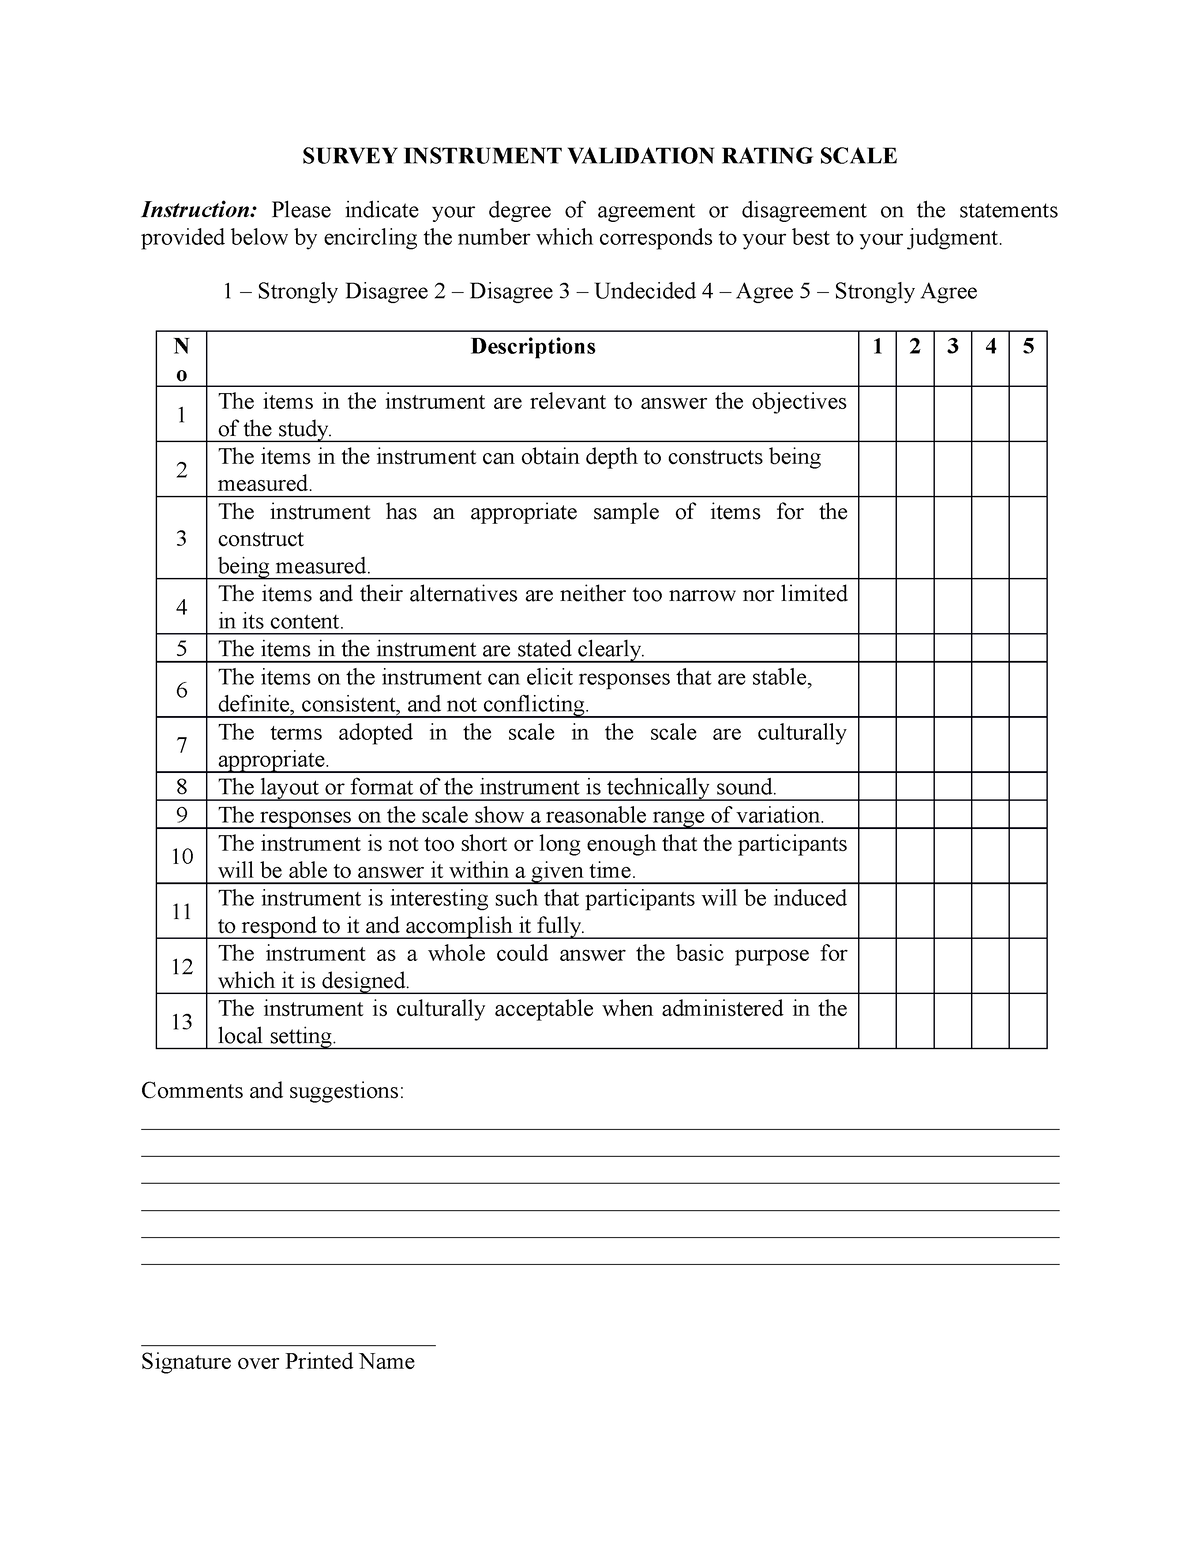 chapter 3 research instrument questionnaire